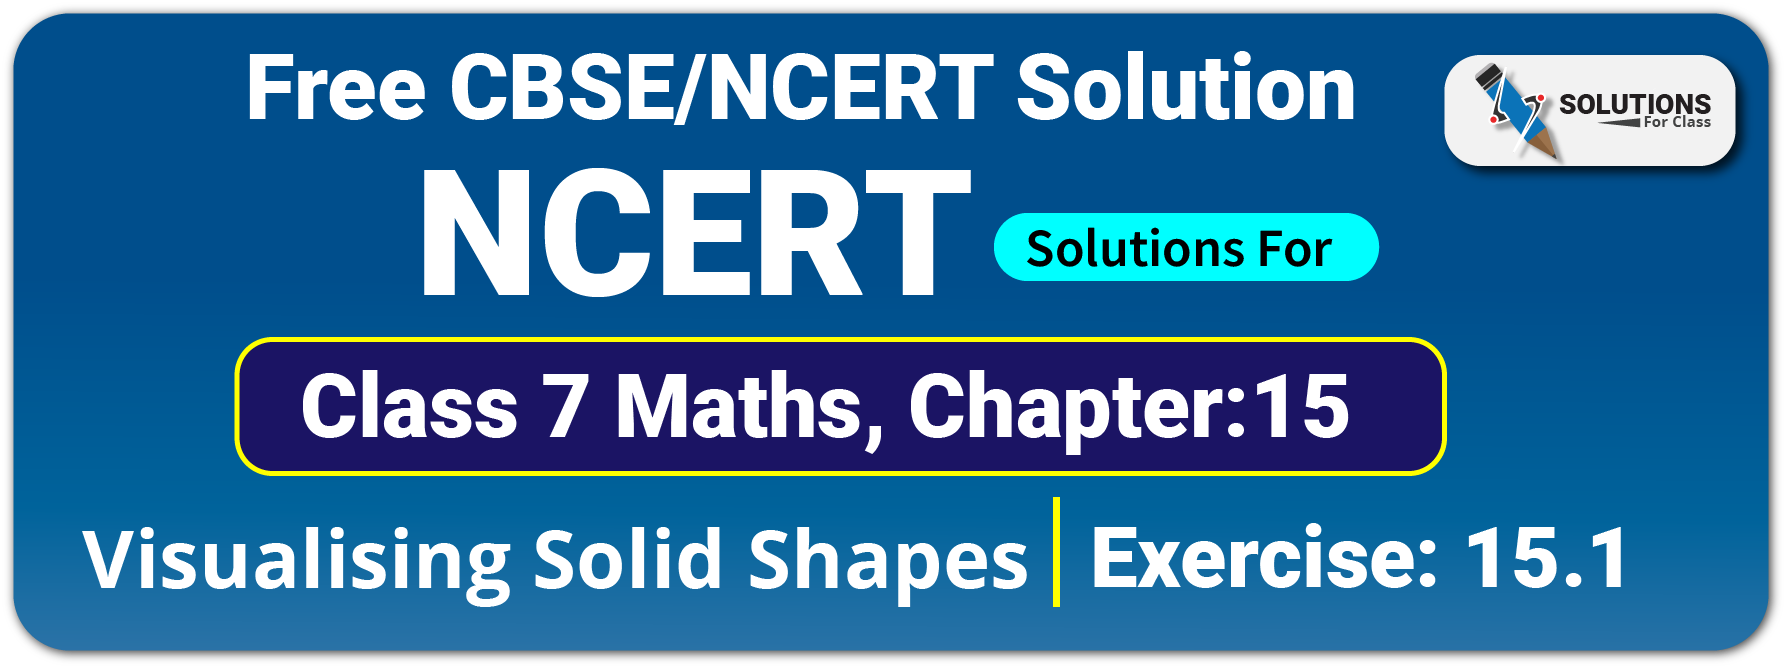 NCERT Solutions For Class 7 Maths Chapter 15 Visulising Solid Shapes Exercise 15.1